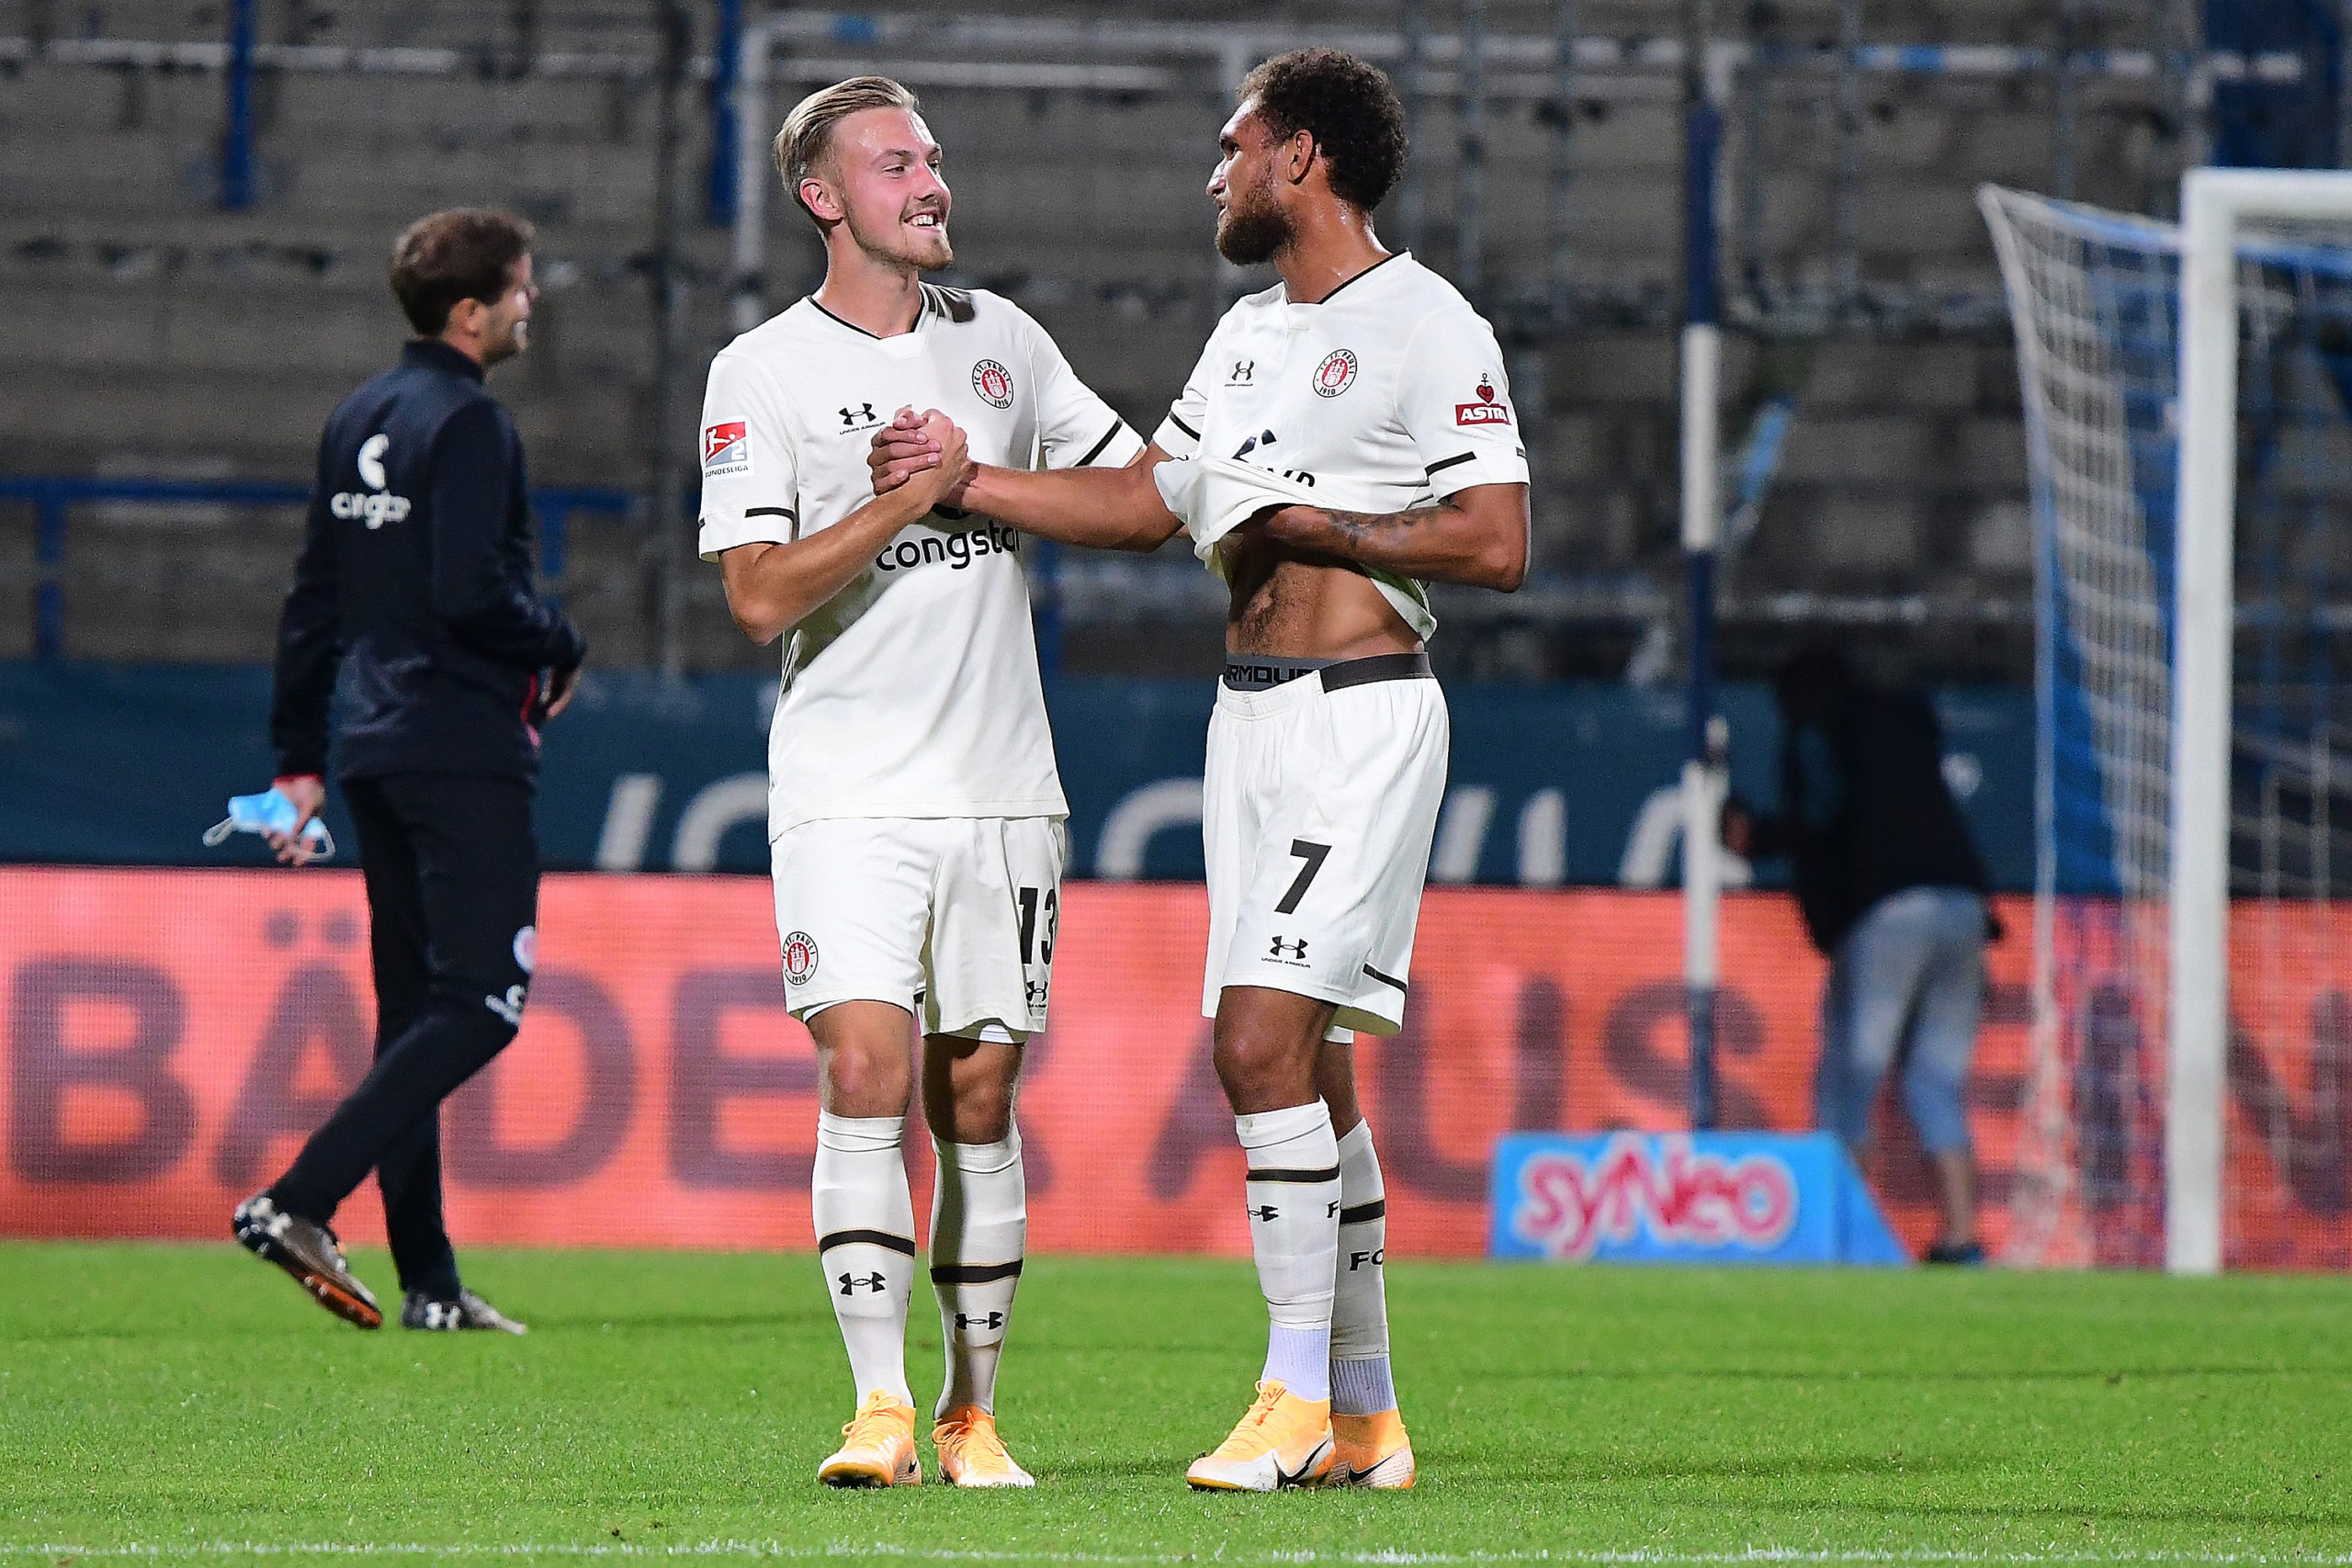 VfL Bochum – FCSP: And it all ended with a bang!